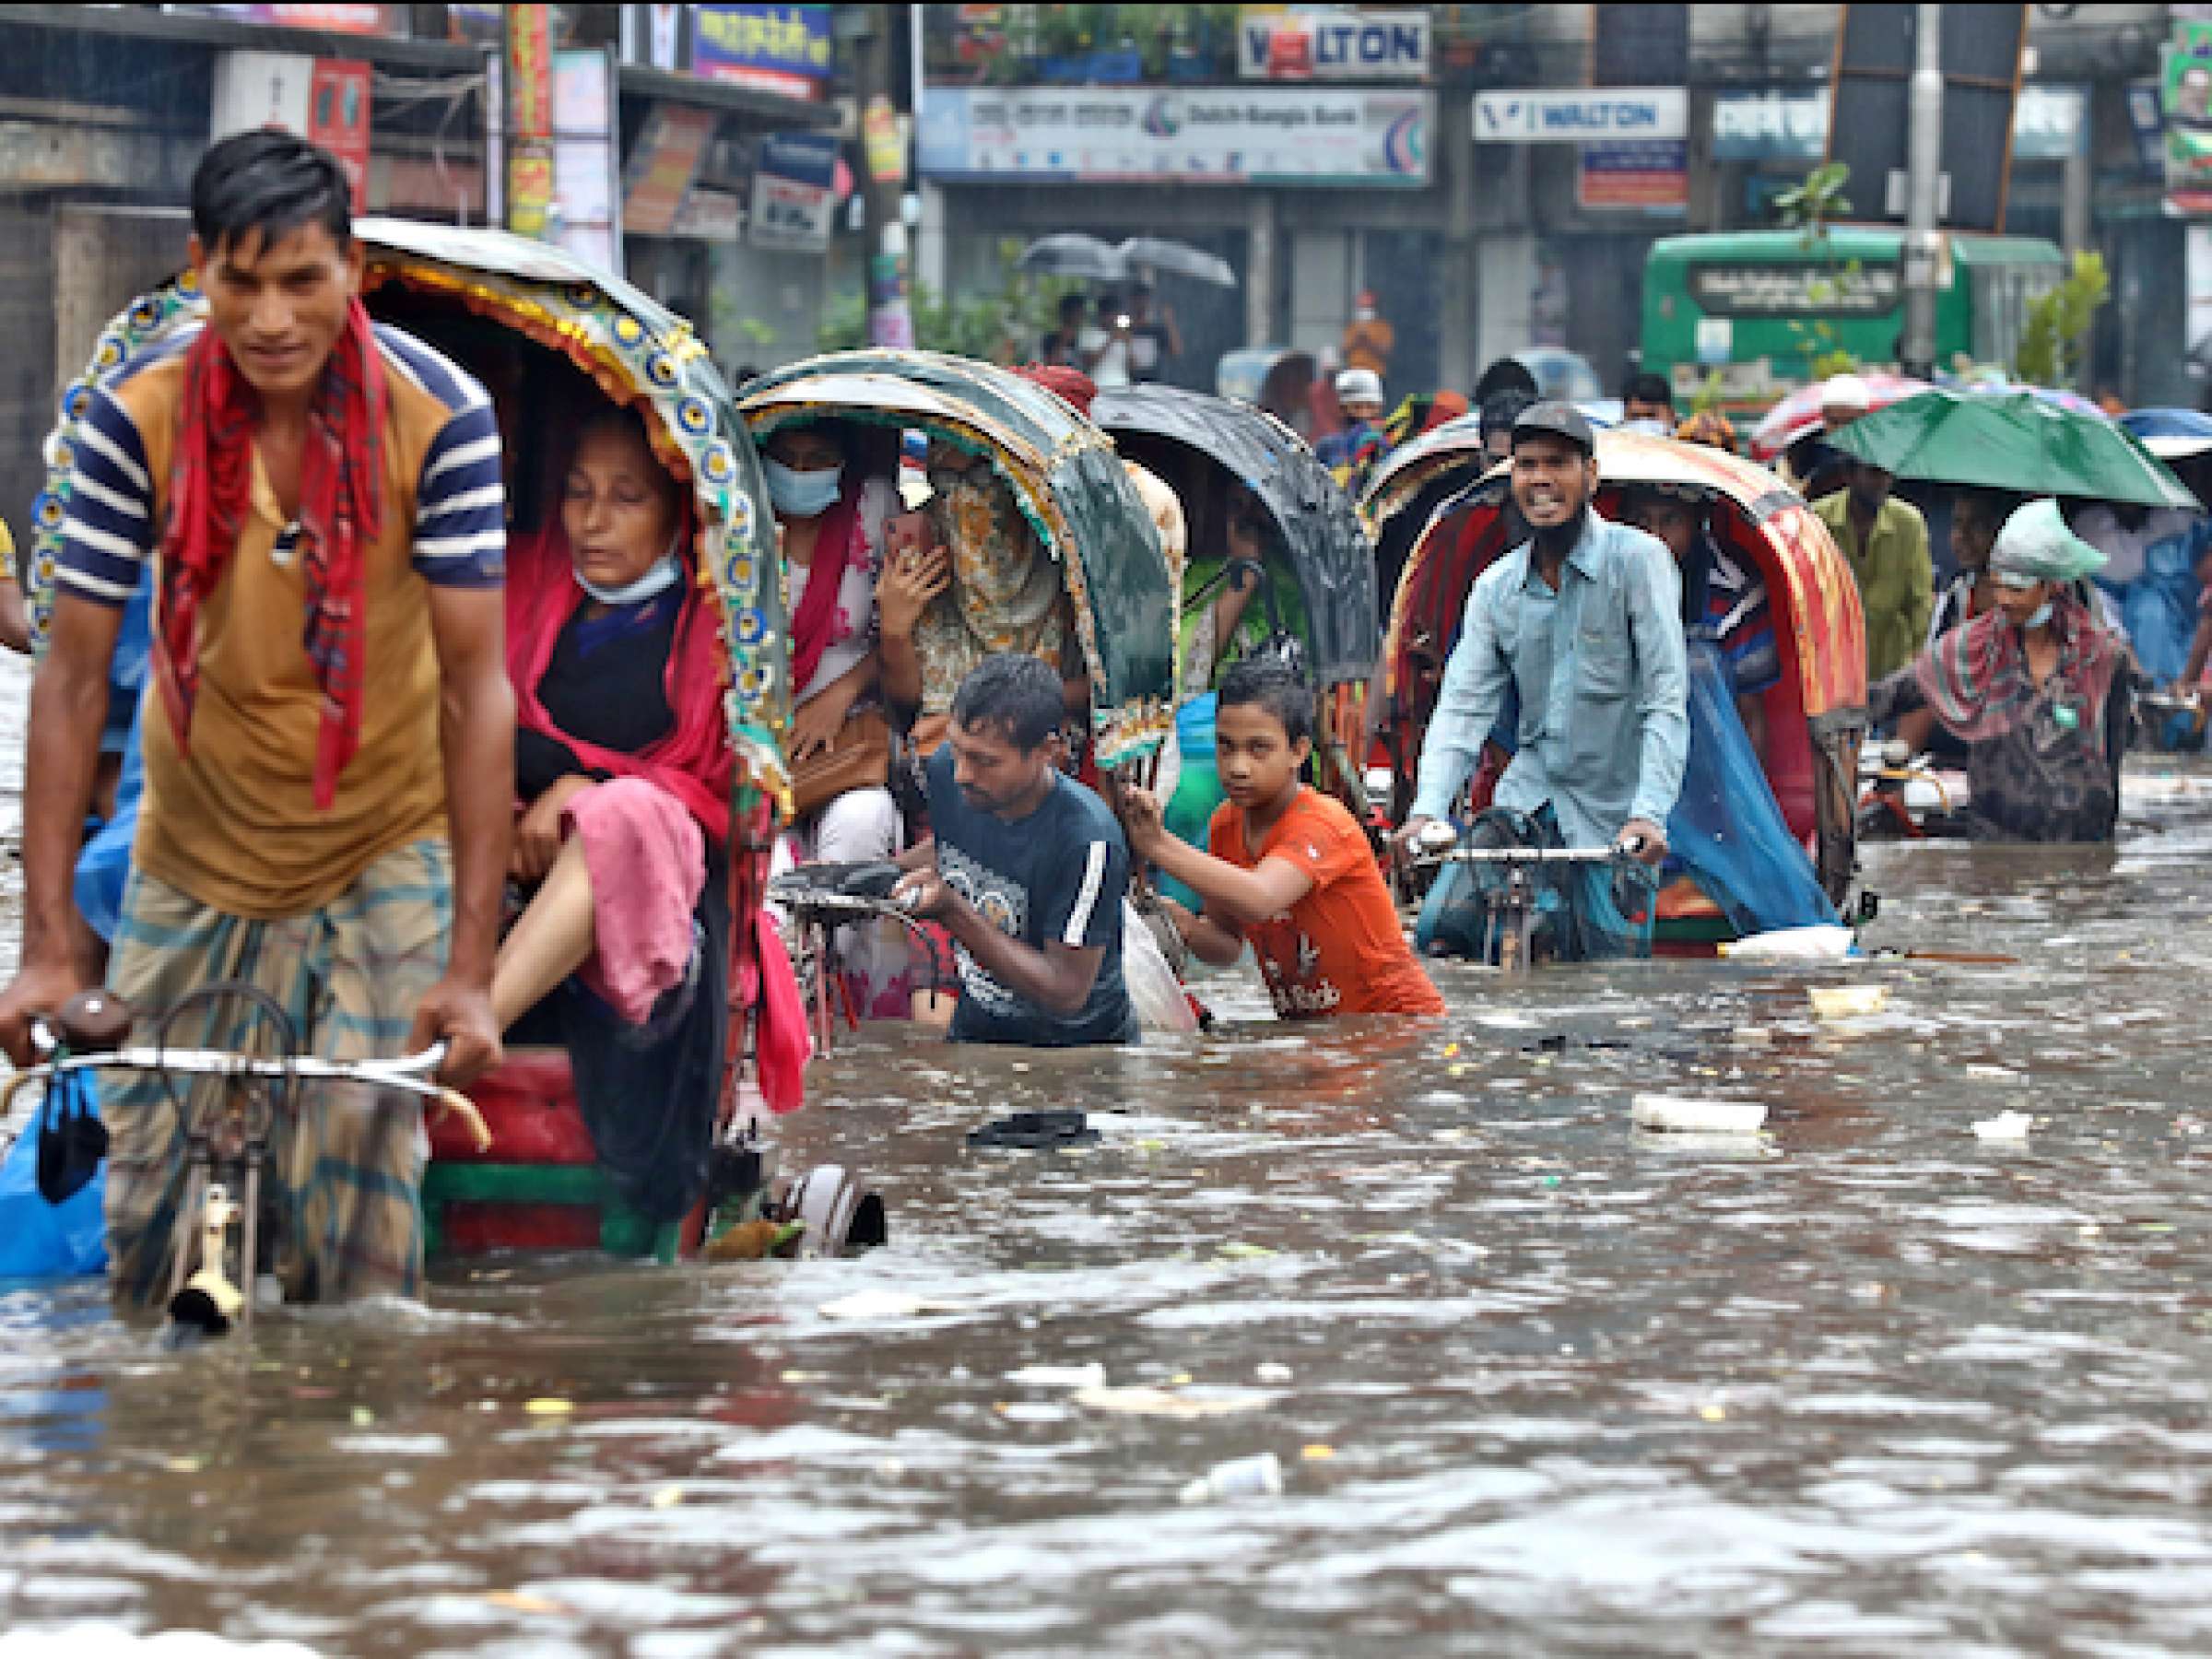 Vehicles try to drive through a flooded street in Dhaka.